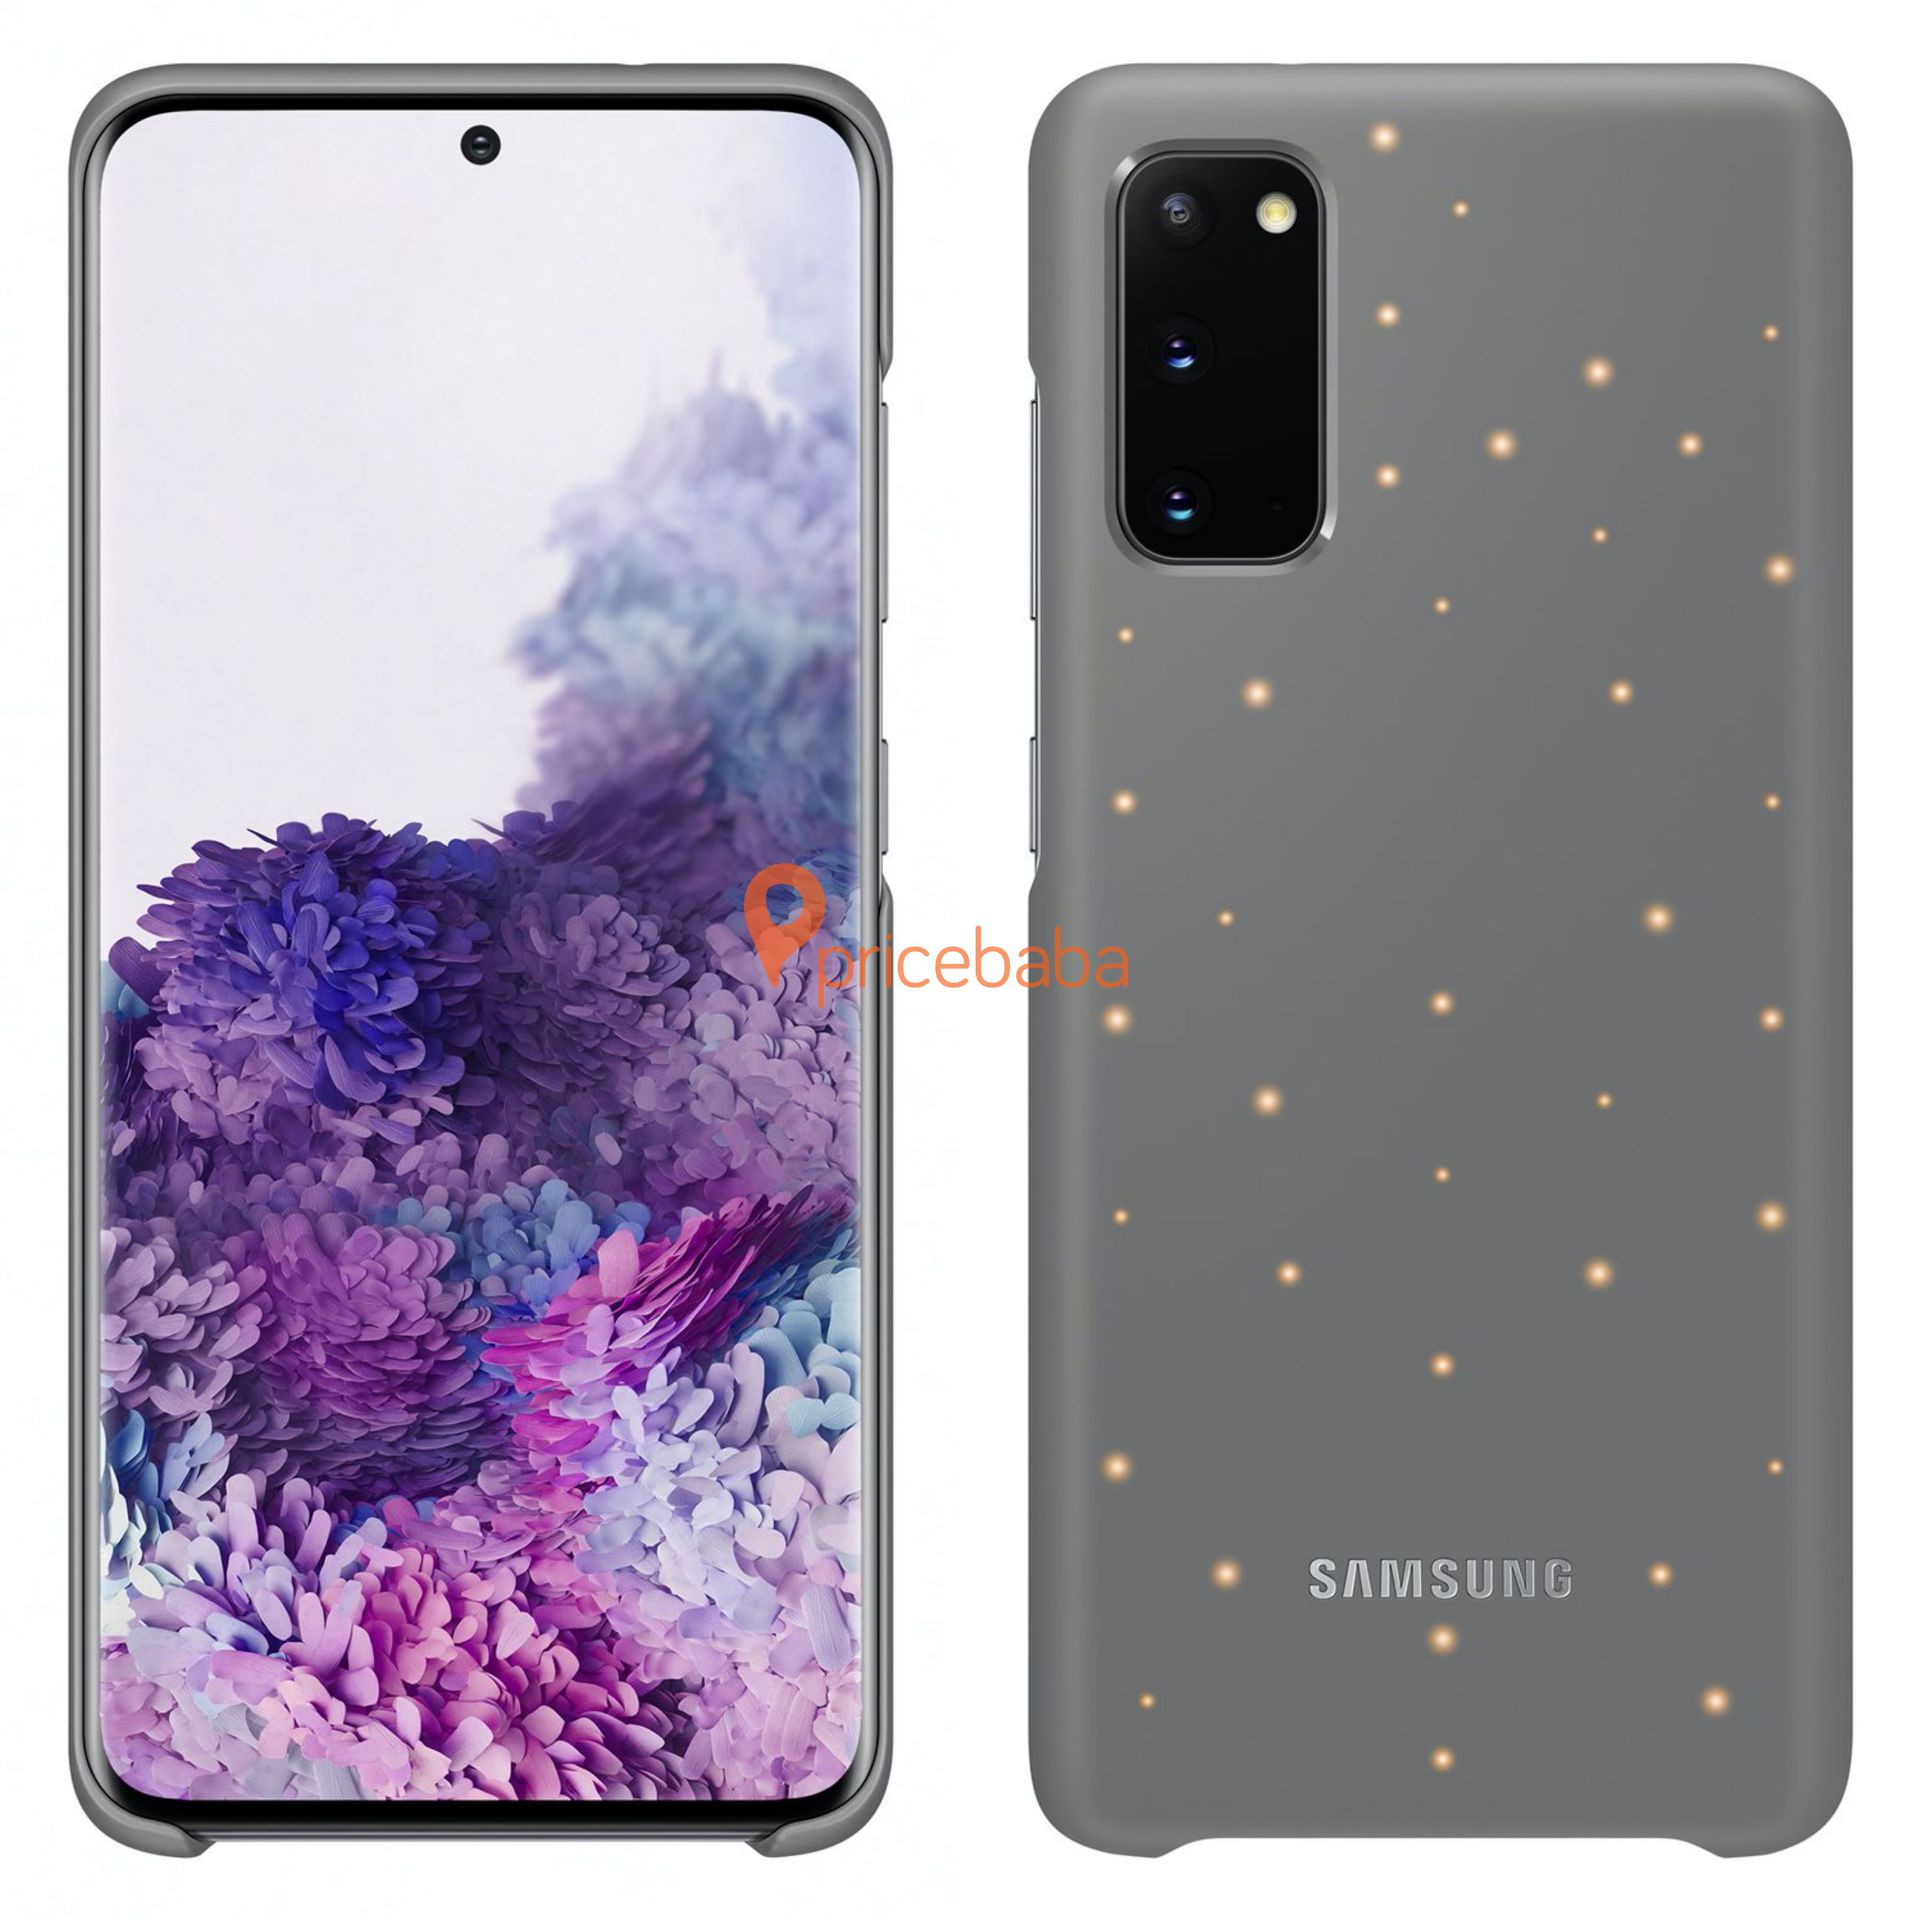 Samsung Galaxy S20 Cases Official Leaks 2